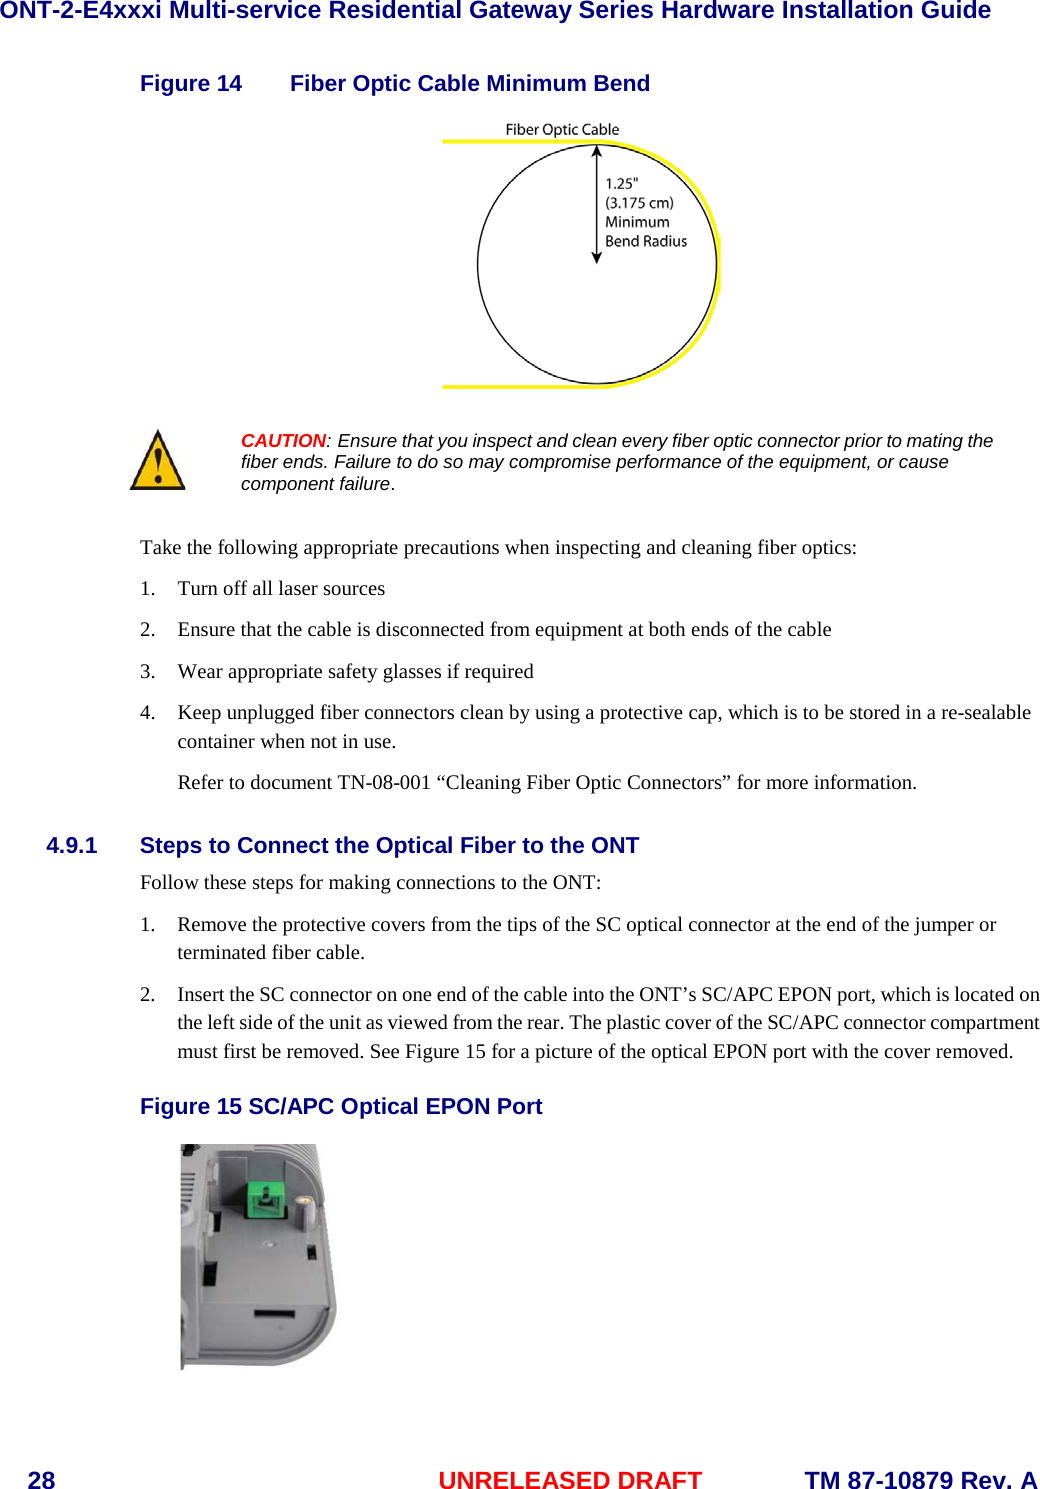 ONT-2-E4xxxi Multi-service Residential Gateway Series Hardware Installation Guide  28 UNRELEASED DRAFT    TM 87-10879 Rev. A Figure 14 Fiber Optic Cable Minimum Bend    CAUTION: Ensure that you inspect and clean every fiber optic connector prior to mating the fiber ends. Failure to do so may compromise performance of the equipment, or cause component failure.  Take the following appropriate precautions when inspecting and cleaning fiber optics: 1. Turn off all laser sources 2. Ensure that the cable is disconnected from equipment at both ends of the cable 3. Wear appropriate safety glasses if required 4. Keep unplugged fiber connectors clean by using a protective cap, which is to be stored in a re-sealable container when not in use. Refer to document TN-08-001 “Cleaning Fiber Optic Connectors” for more information. 4.9.1 Steps to Connect the Optical Fiber to the ONT Follow these steps for making connections to the ONT: 1. Remove the protective covers from the tips of the SC optical connector at the end of the jumper or terminated fiber cable. 2. Insert the SC connector on one end of the cable into the ONT’s SC/APC EPON port, which is located on the left side of the unit as viewed from the rear. The plastic cover of the SC/APC connector compartment must first be removed. See Figure 15 for a picture of the optical EPON port with the cover removed.    Figure 15 SC/APC Optical EPON Port  